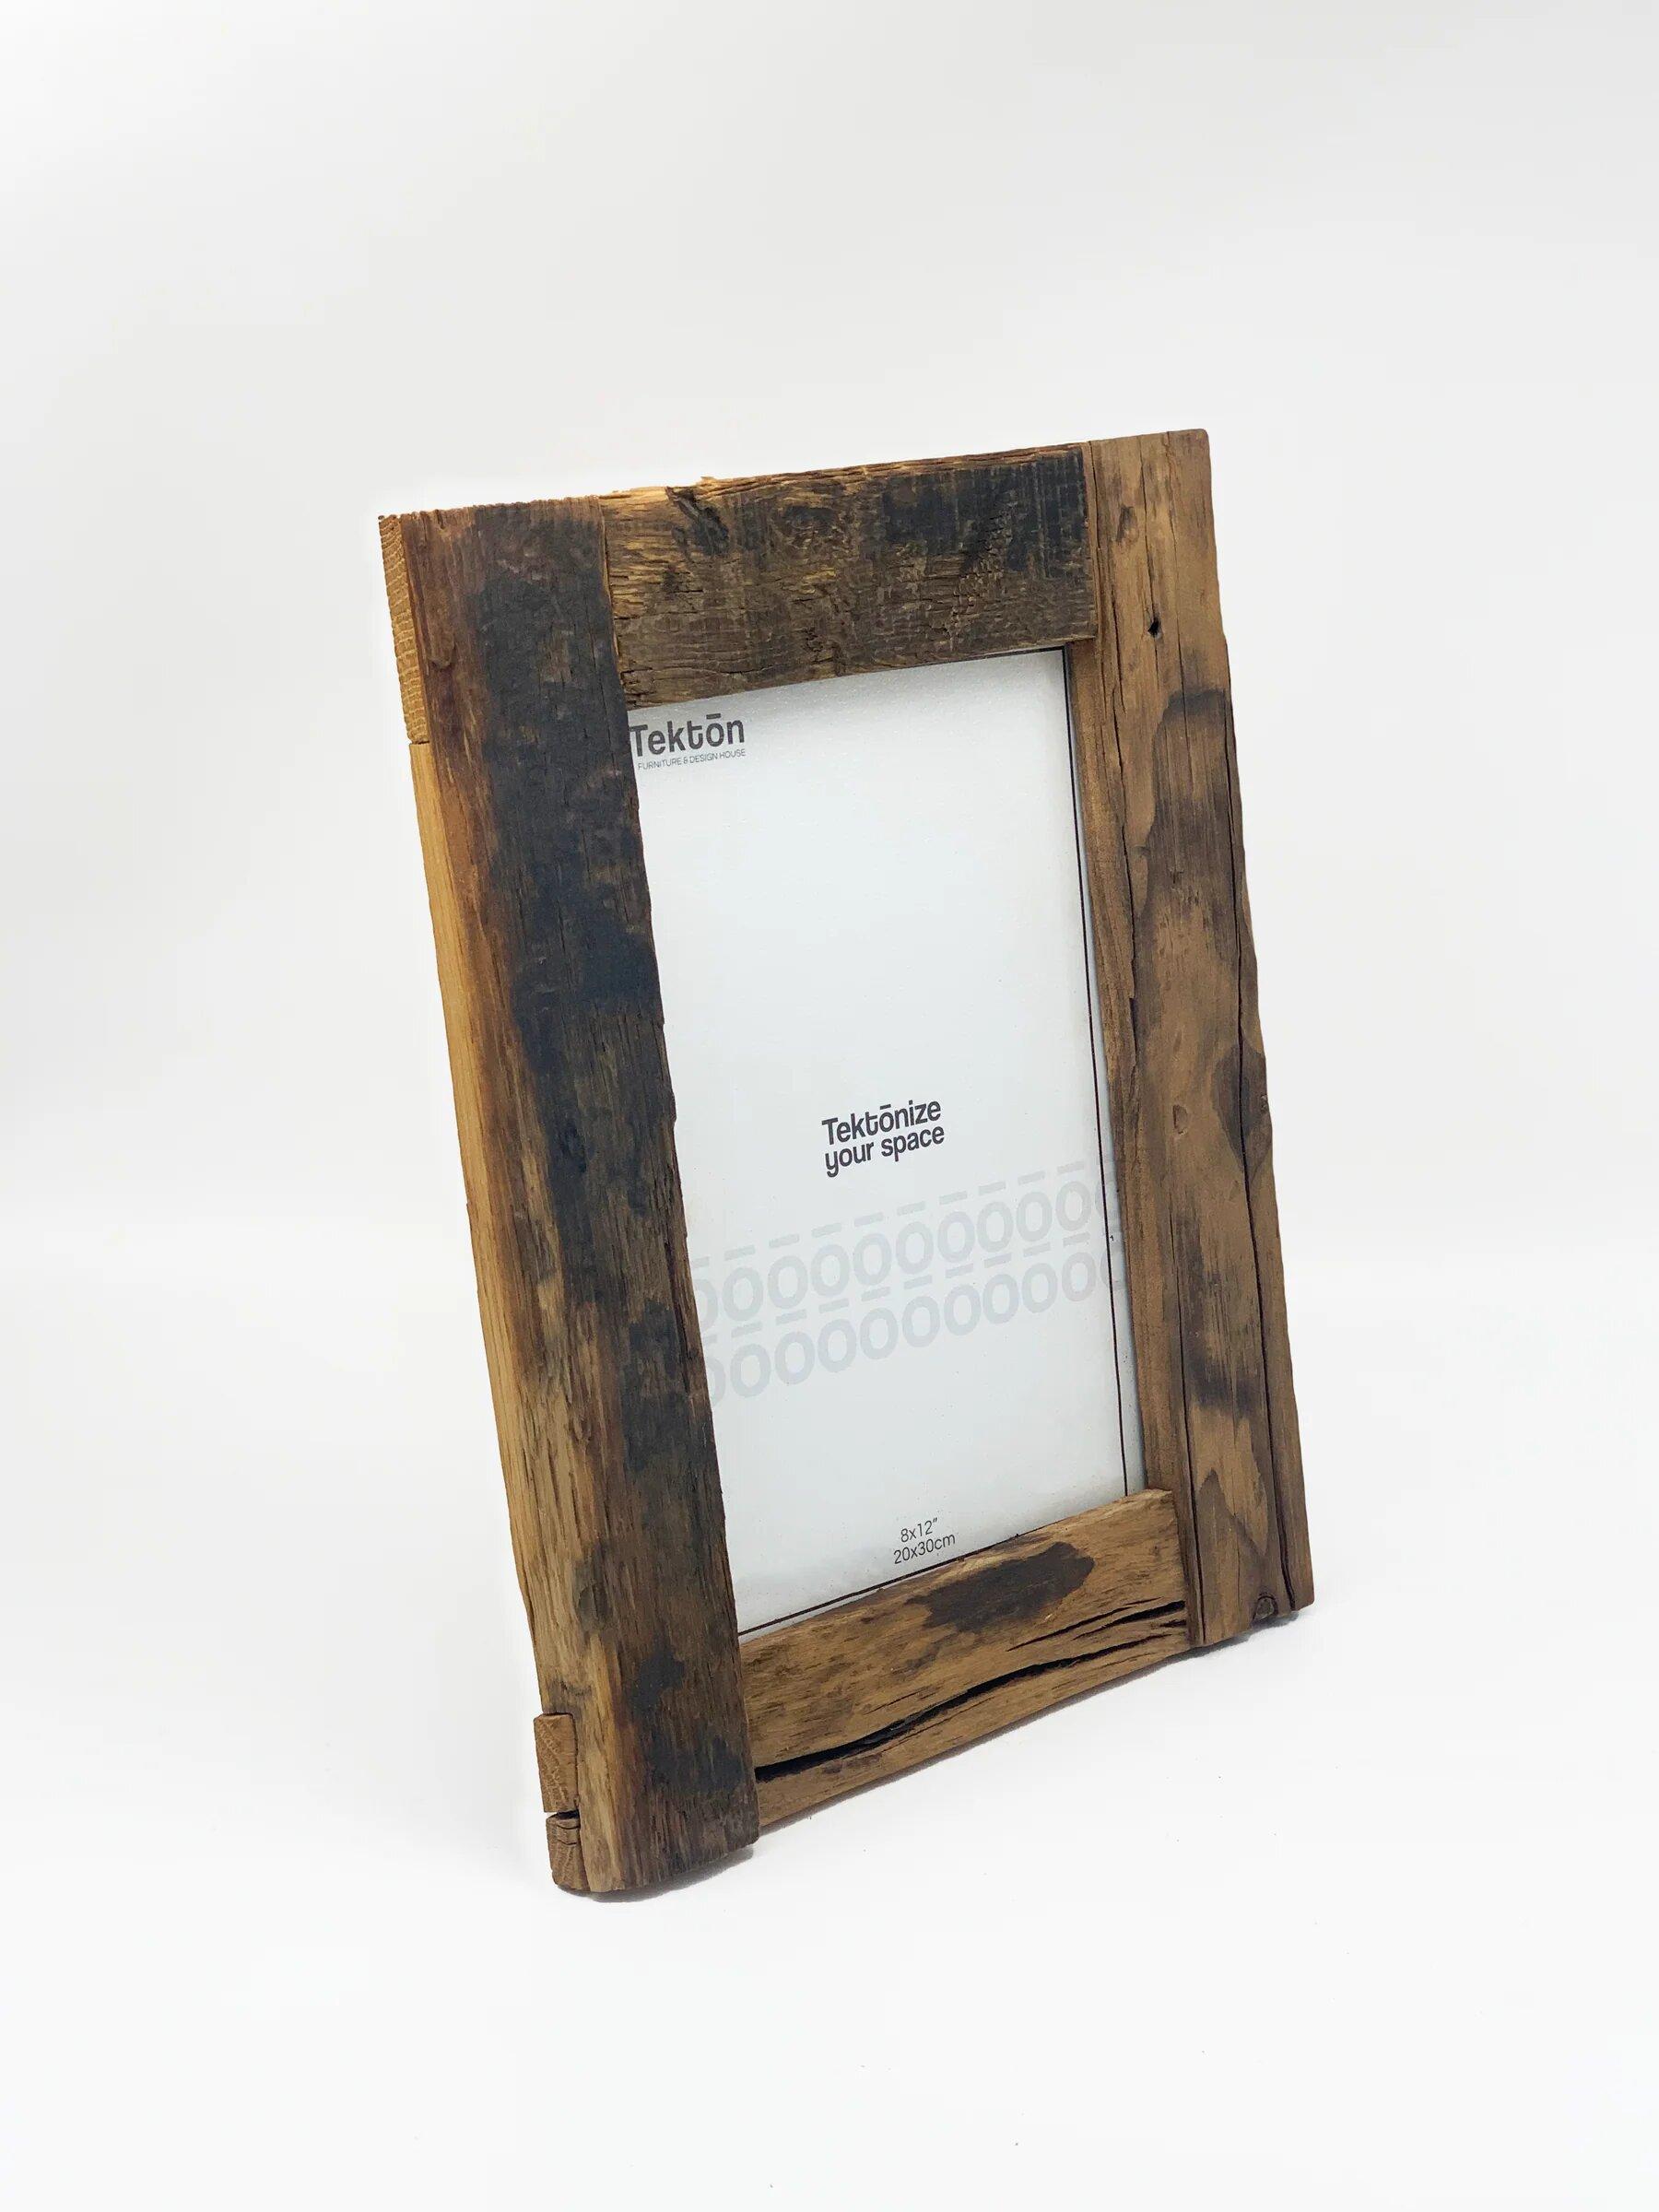 Introducing our Reclaimed Frames, crafted from railway sleepers that date back to the 1850s! Our design experts have given this wood a new purpose, creating a timeless piece that is not only beautiful, but also environmentally friendly and